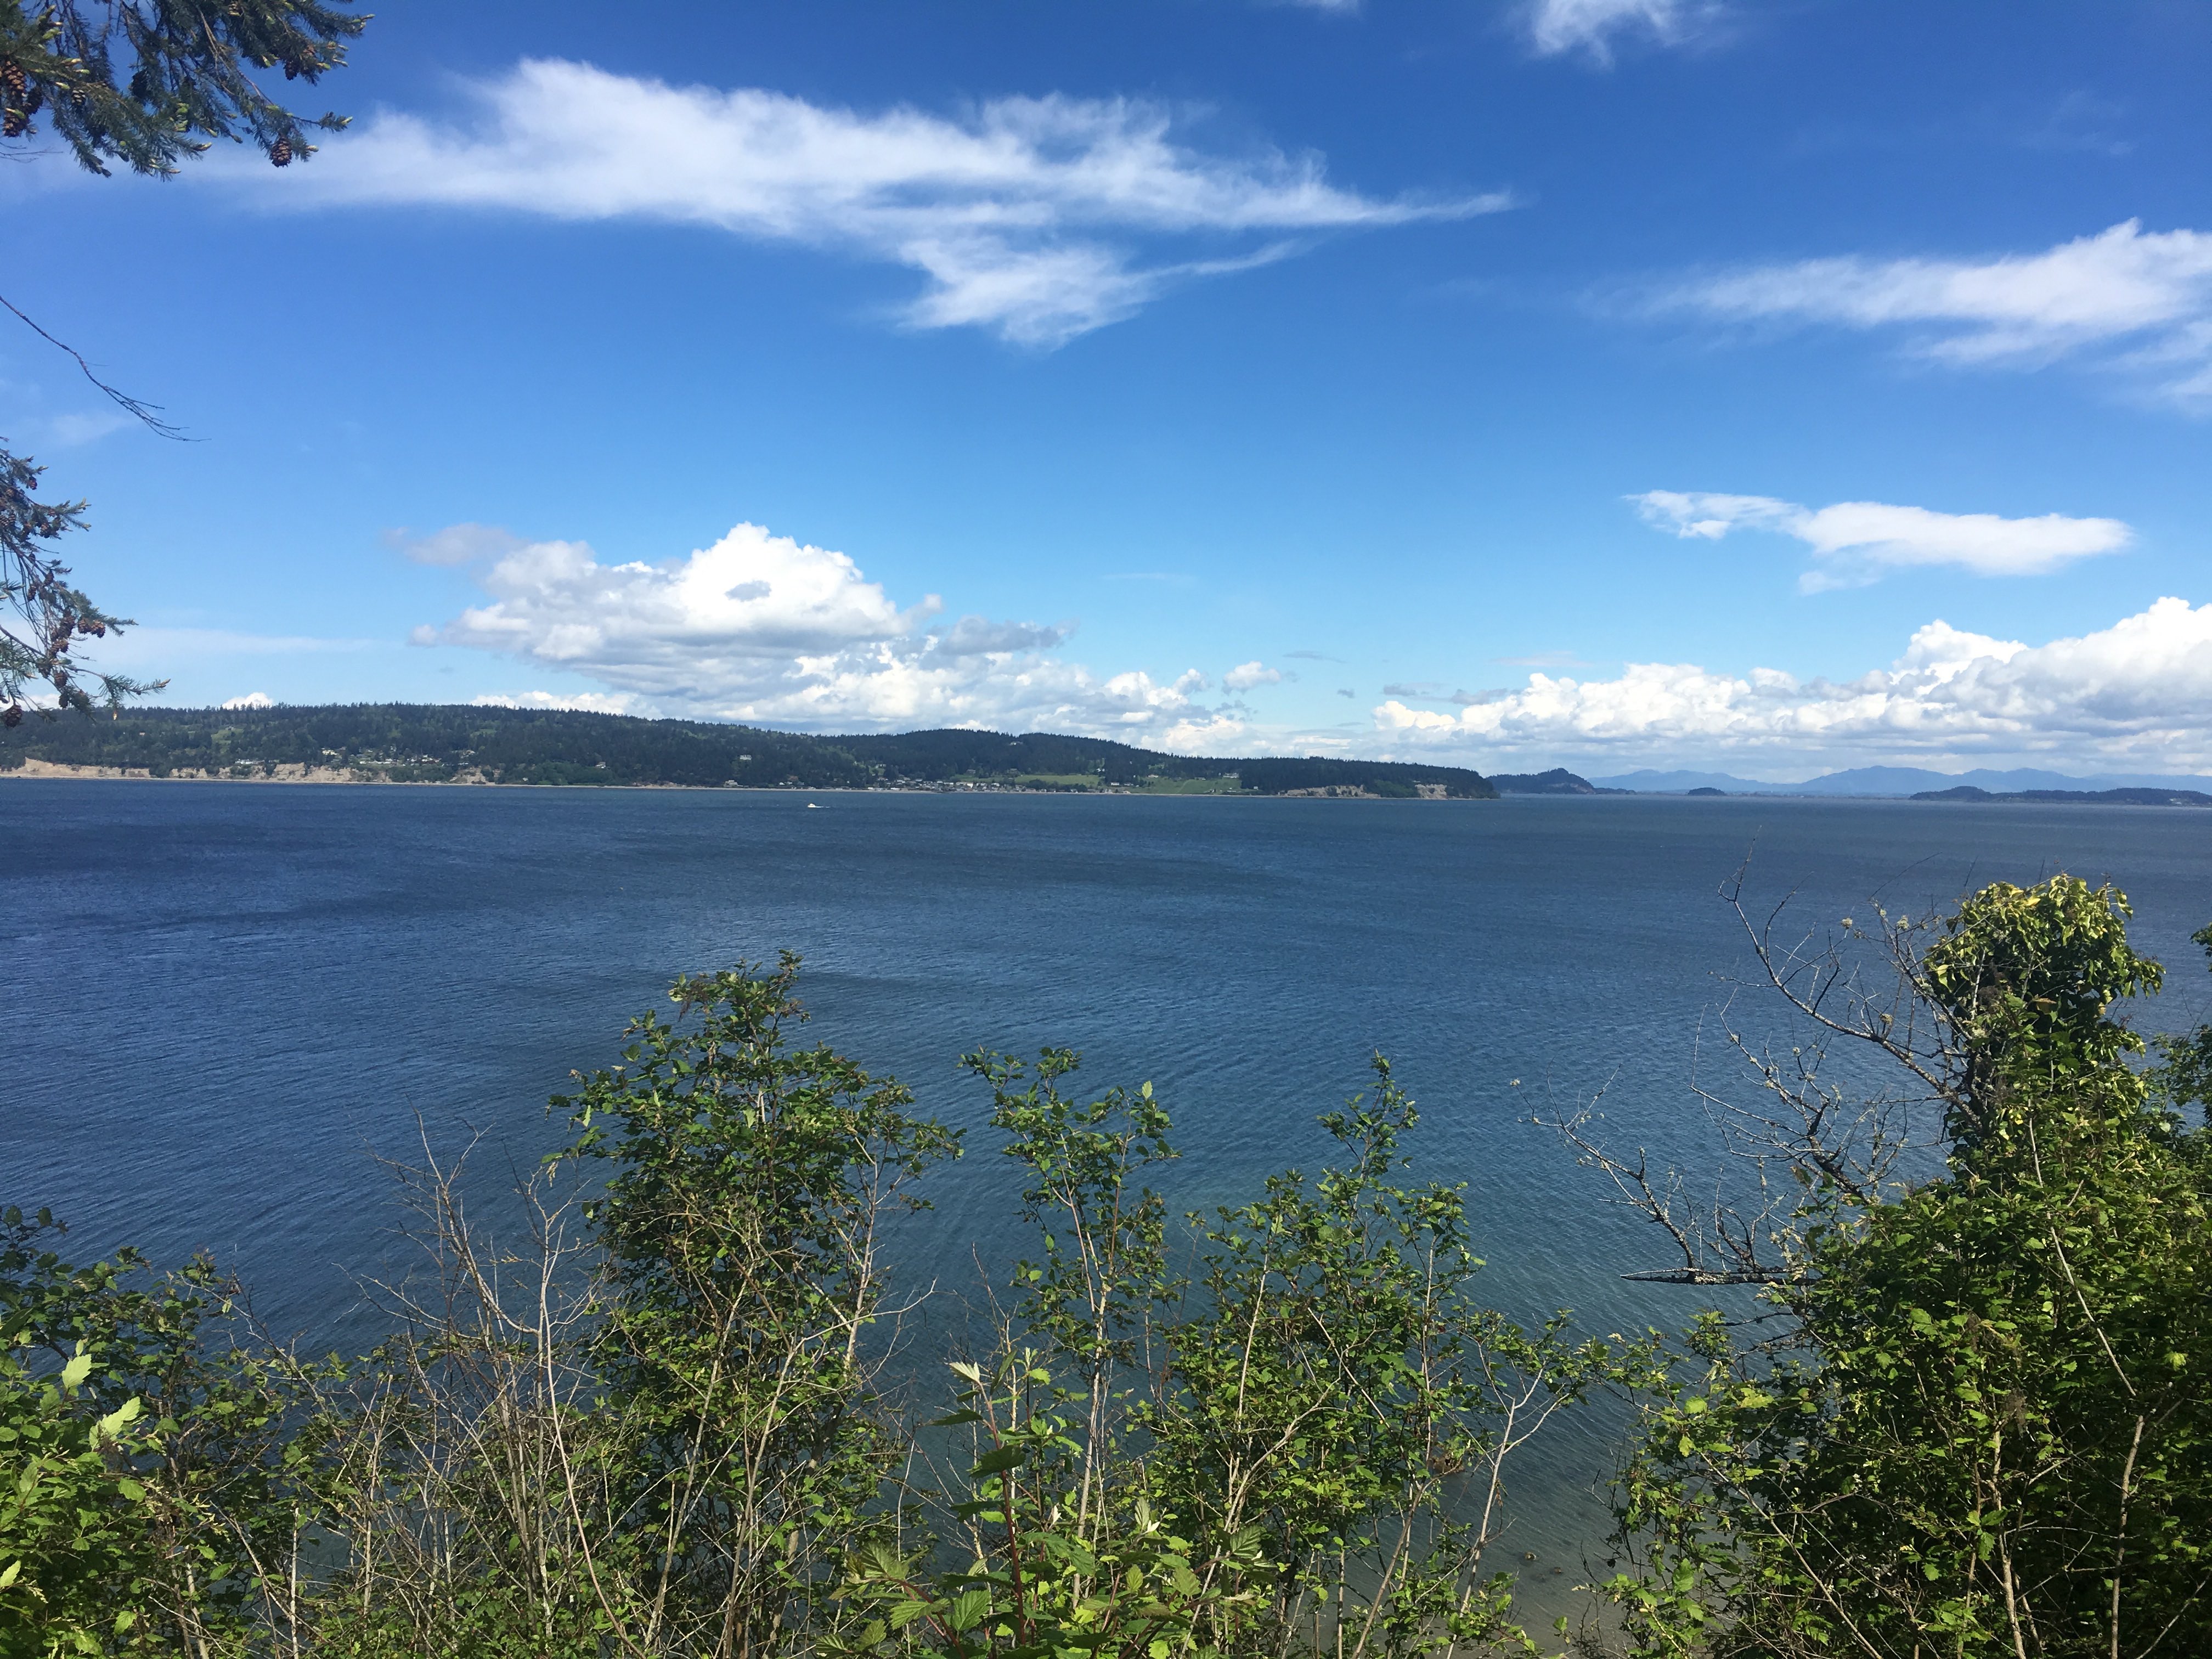 Artists and visitors alike are inspired by the beauty of Camano Island